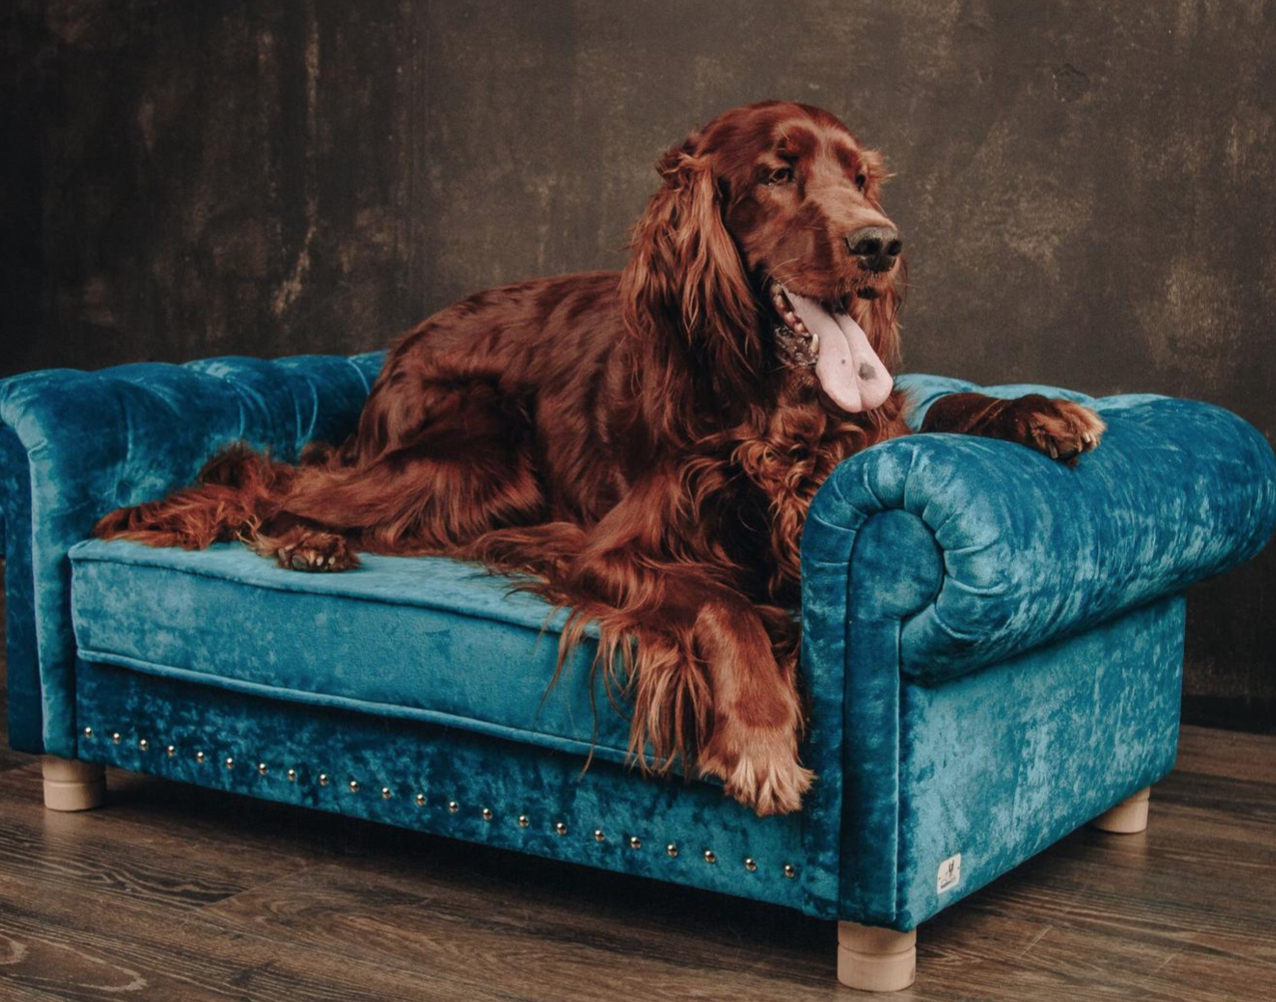 tufted couch dog bed from happyHipCrafts on Etsy